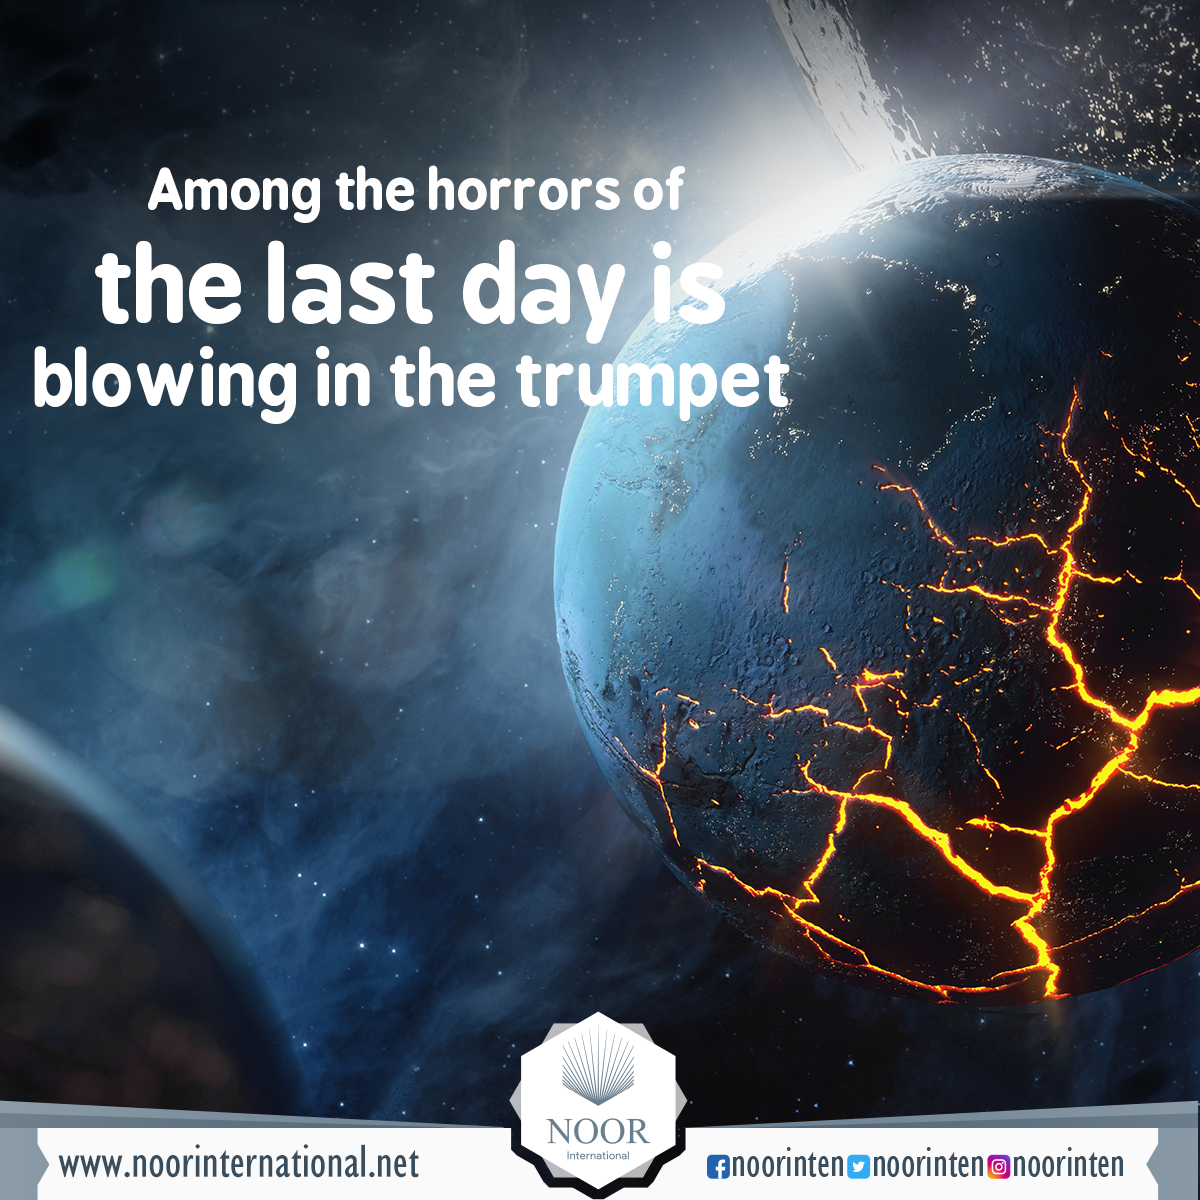 Among the horrors of the last day is blowing in the trumpet